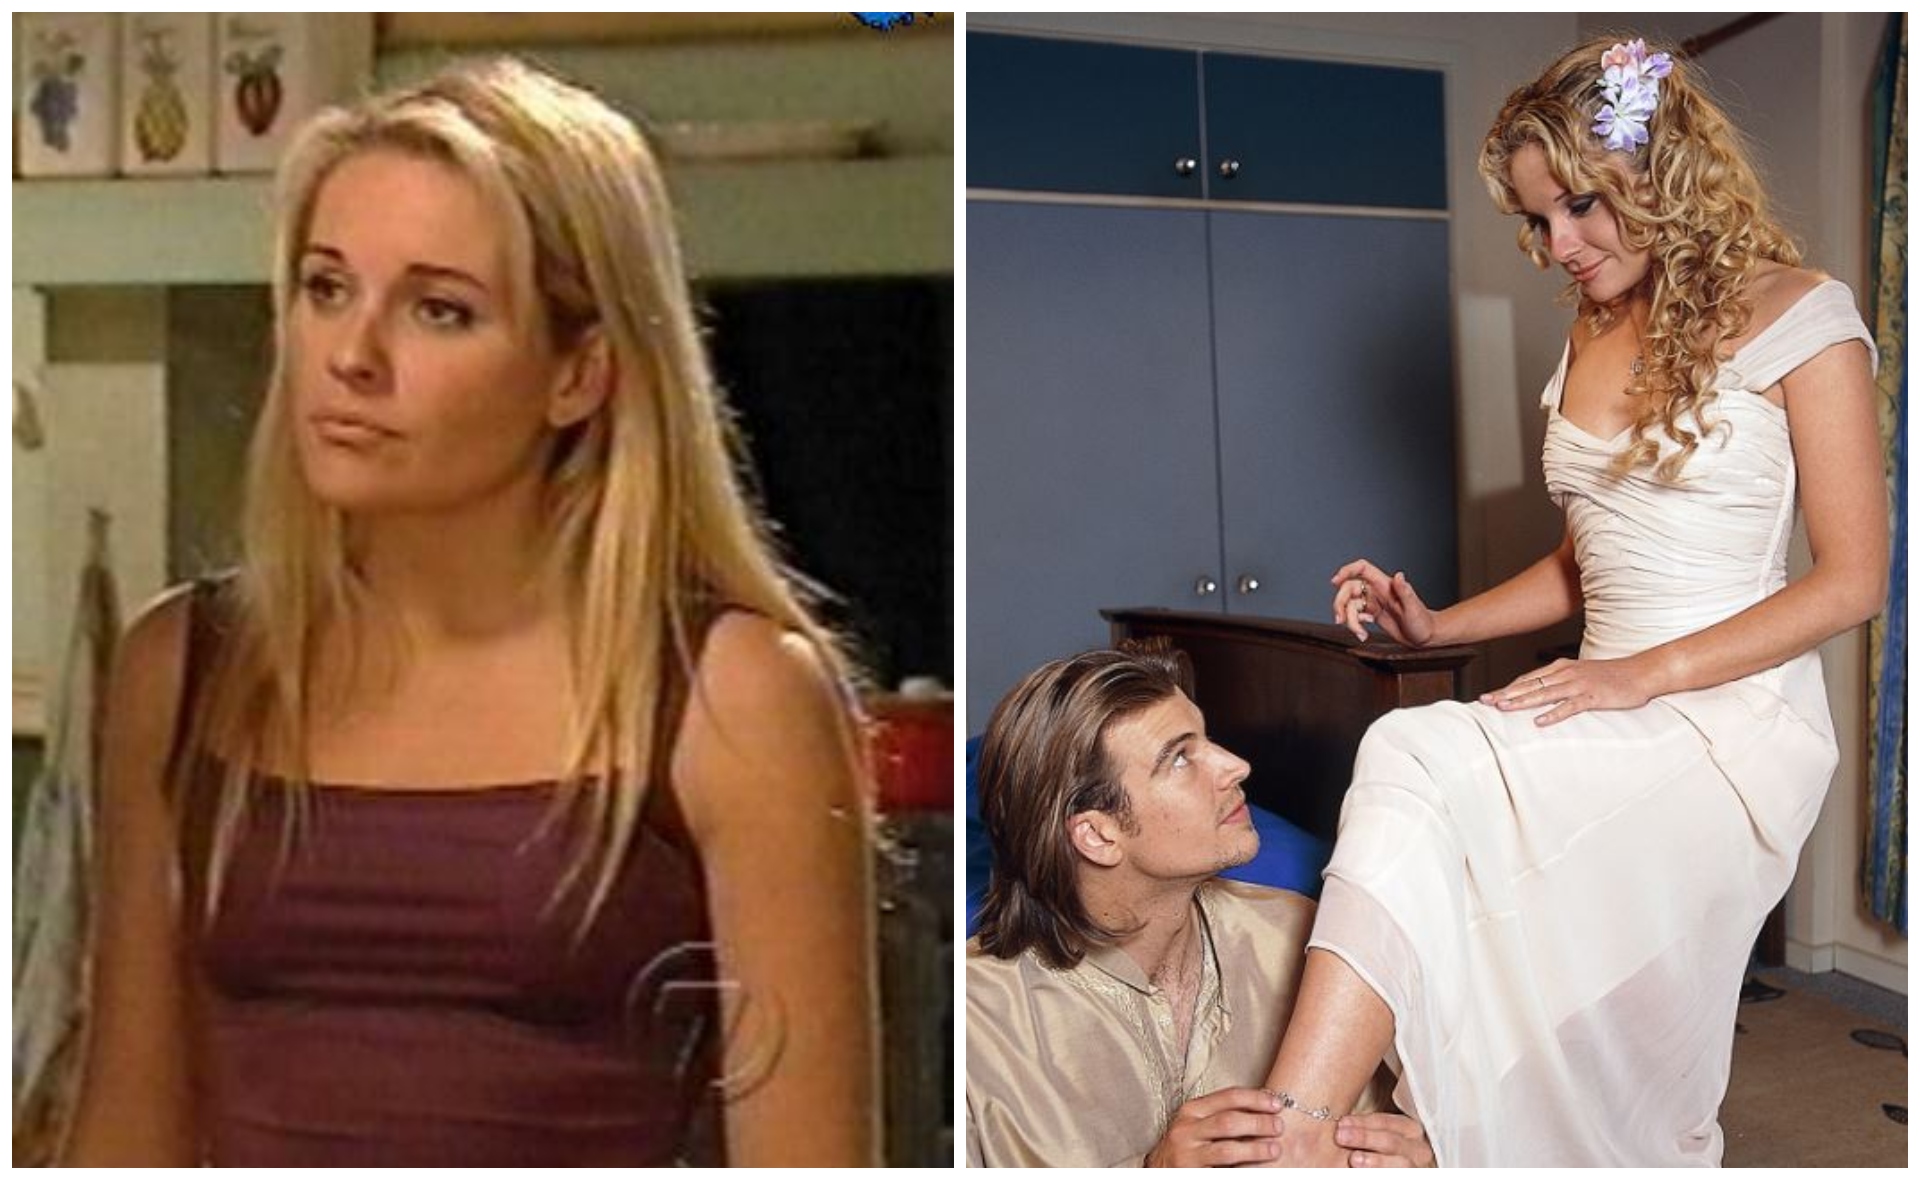 Beloved Home & Away character Rebecca Nash was played by four different actresses in the 90s – the late Belinda Emmett stood out the most